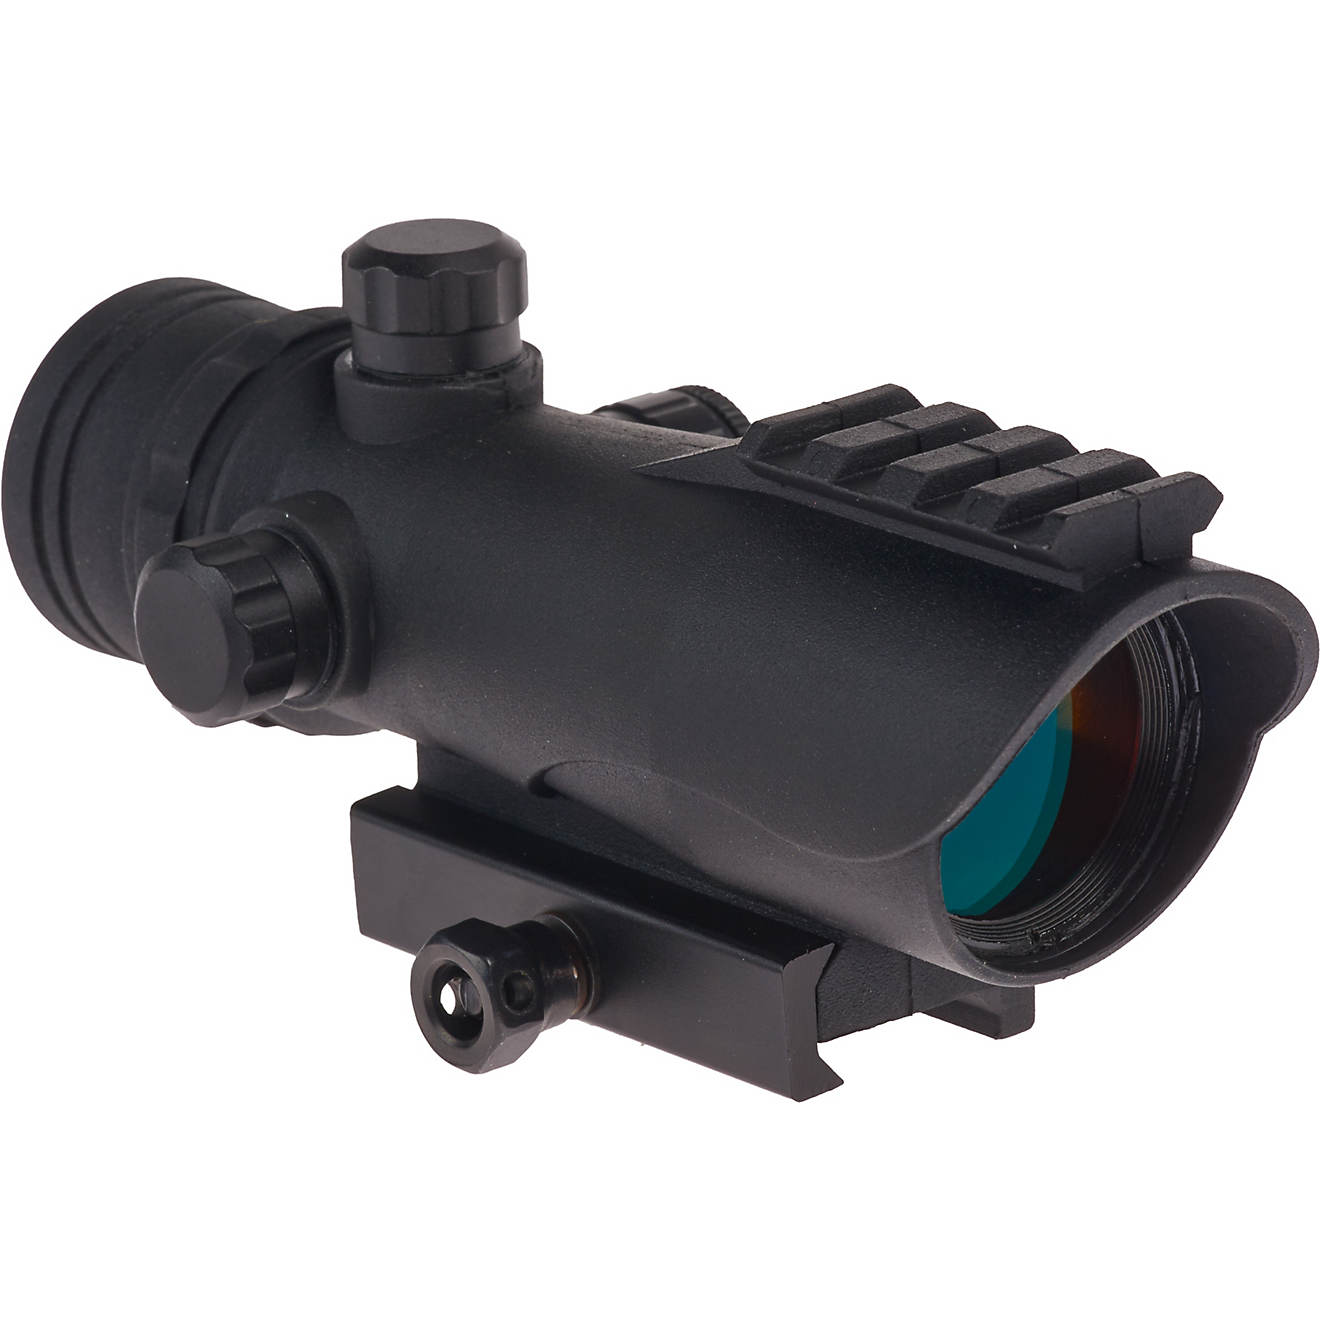 CenterPoint 1 x 30 Large Battle Sight                                                                                            - view number 1